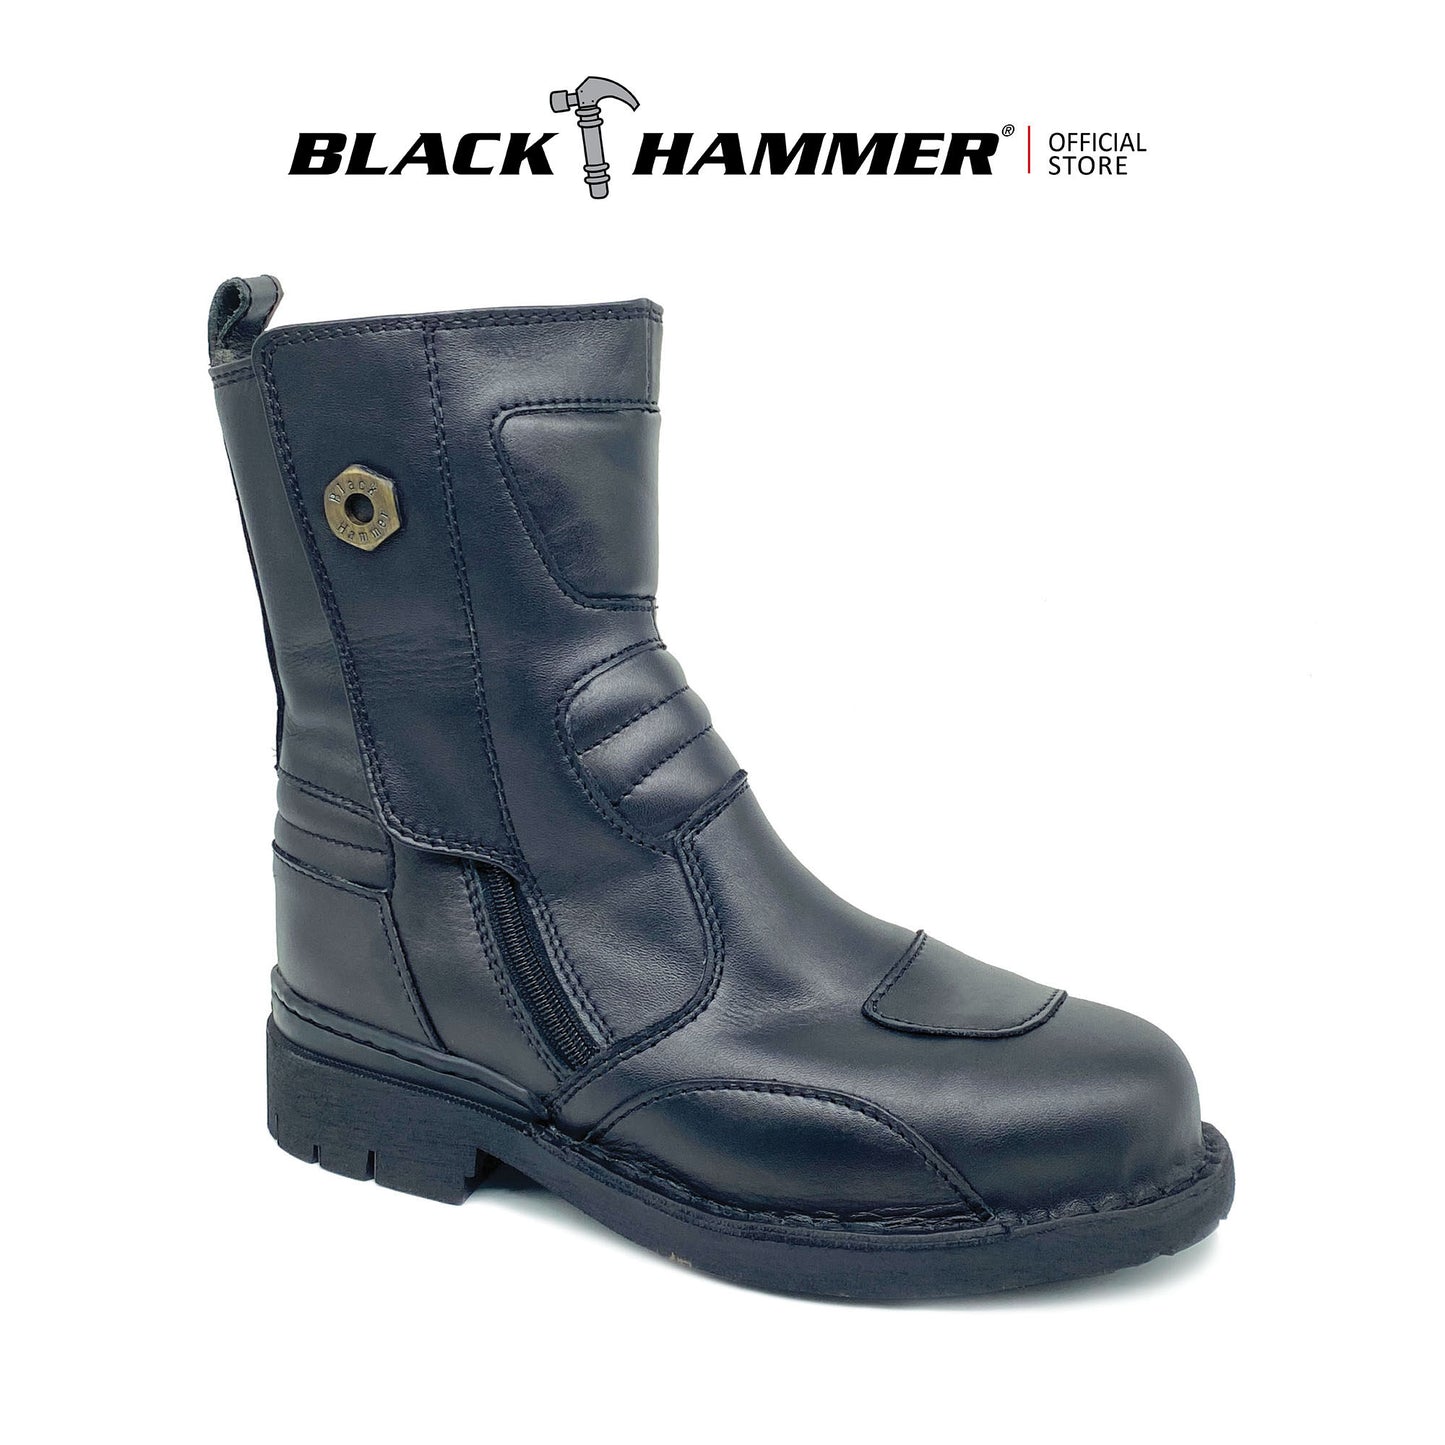 Black Hammer Men 4000 Series BH4884 Oil-Resistant Genuine Leather Durable Steel Toe cap & midsole safety shoes 